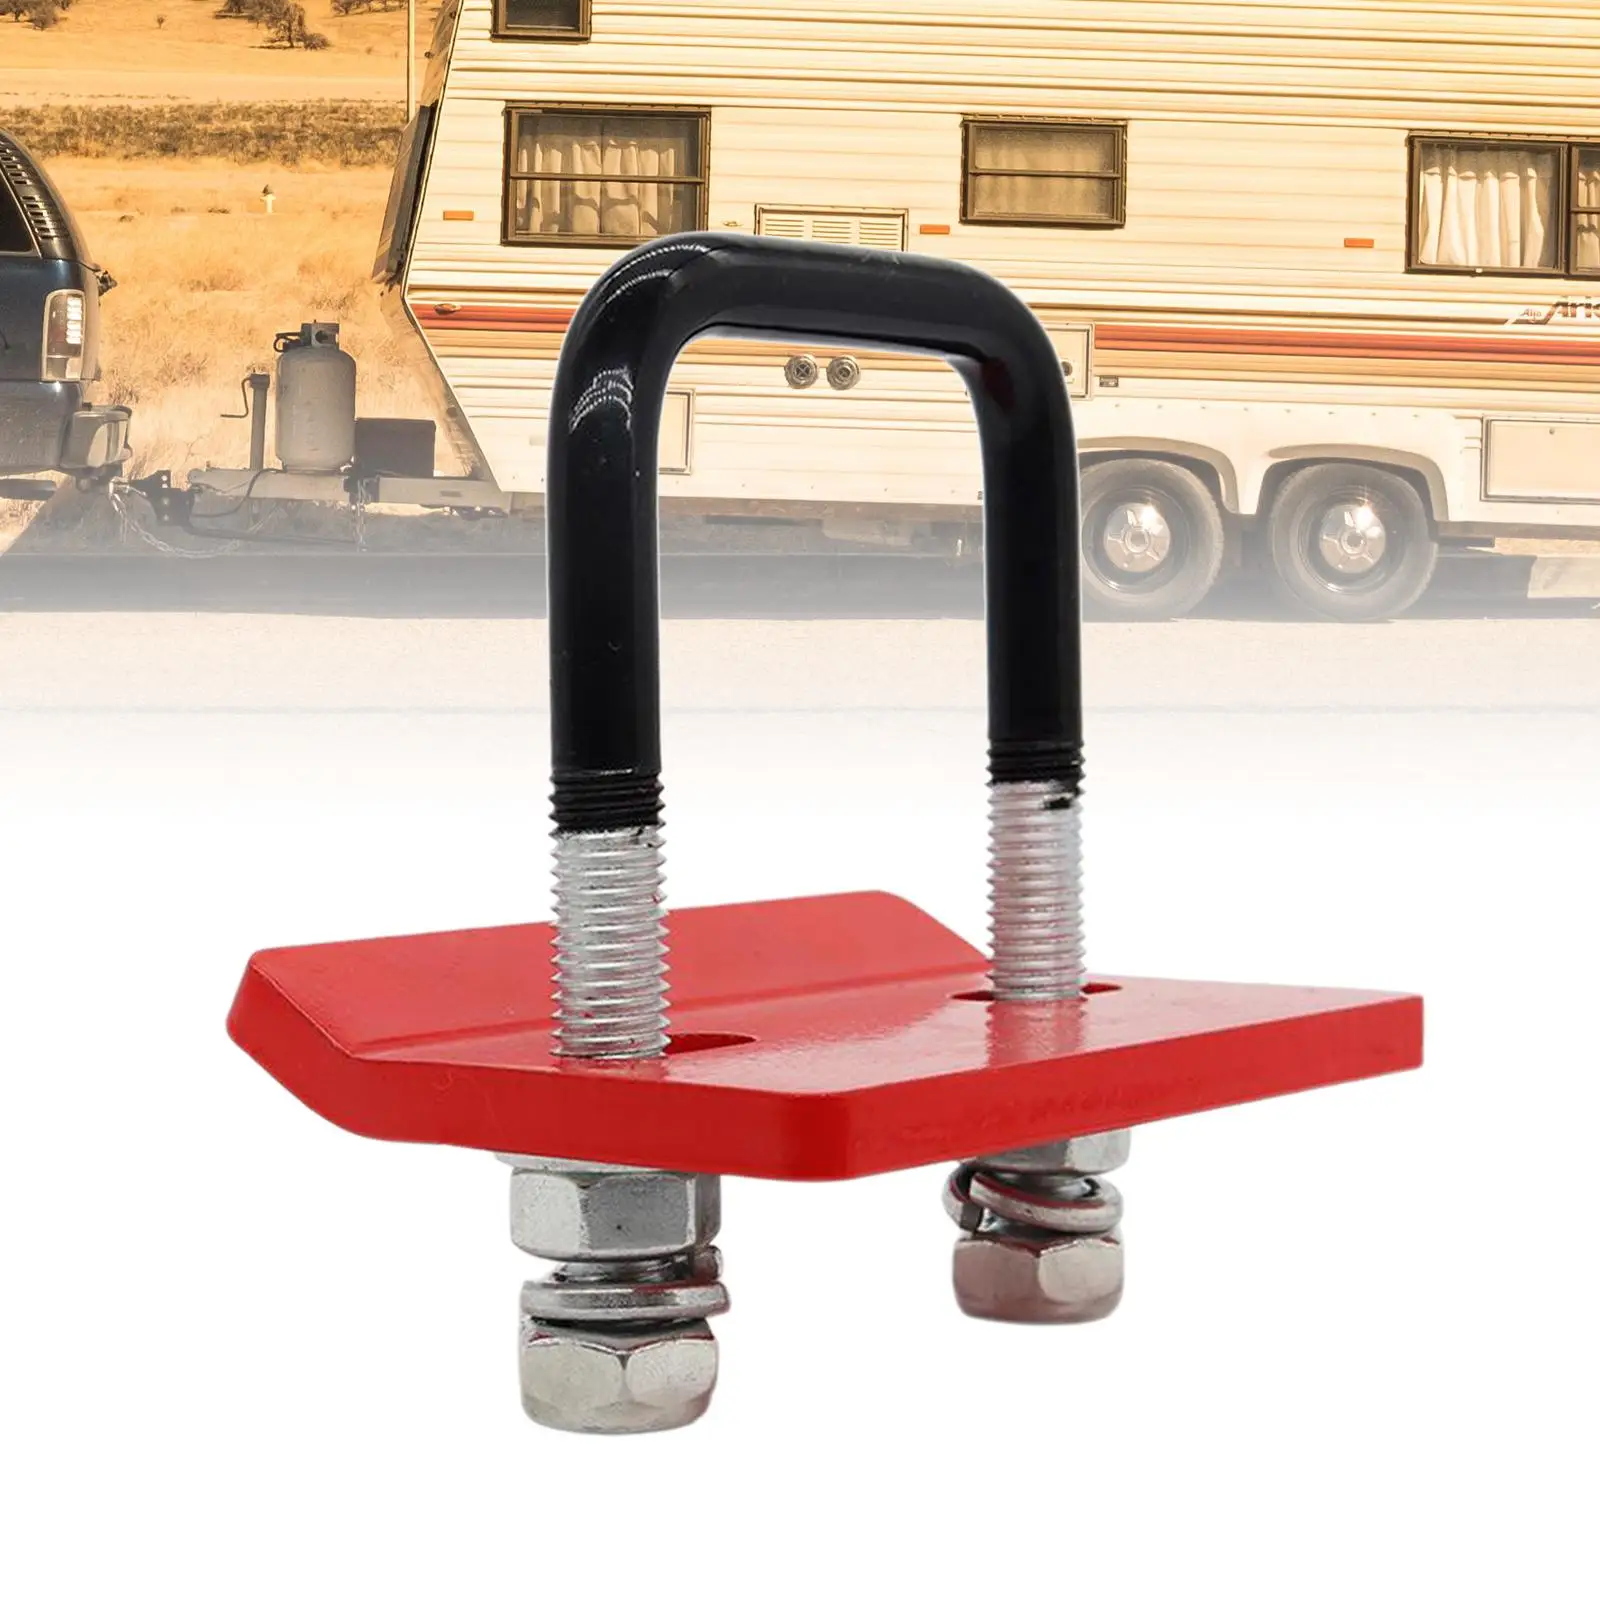 Hitch Tightener Transportation Trailer Hitches Clamp Anti Rattle Stabilizer for Boat Trailer Ball Mount Hitch Tray Bike Rack